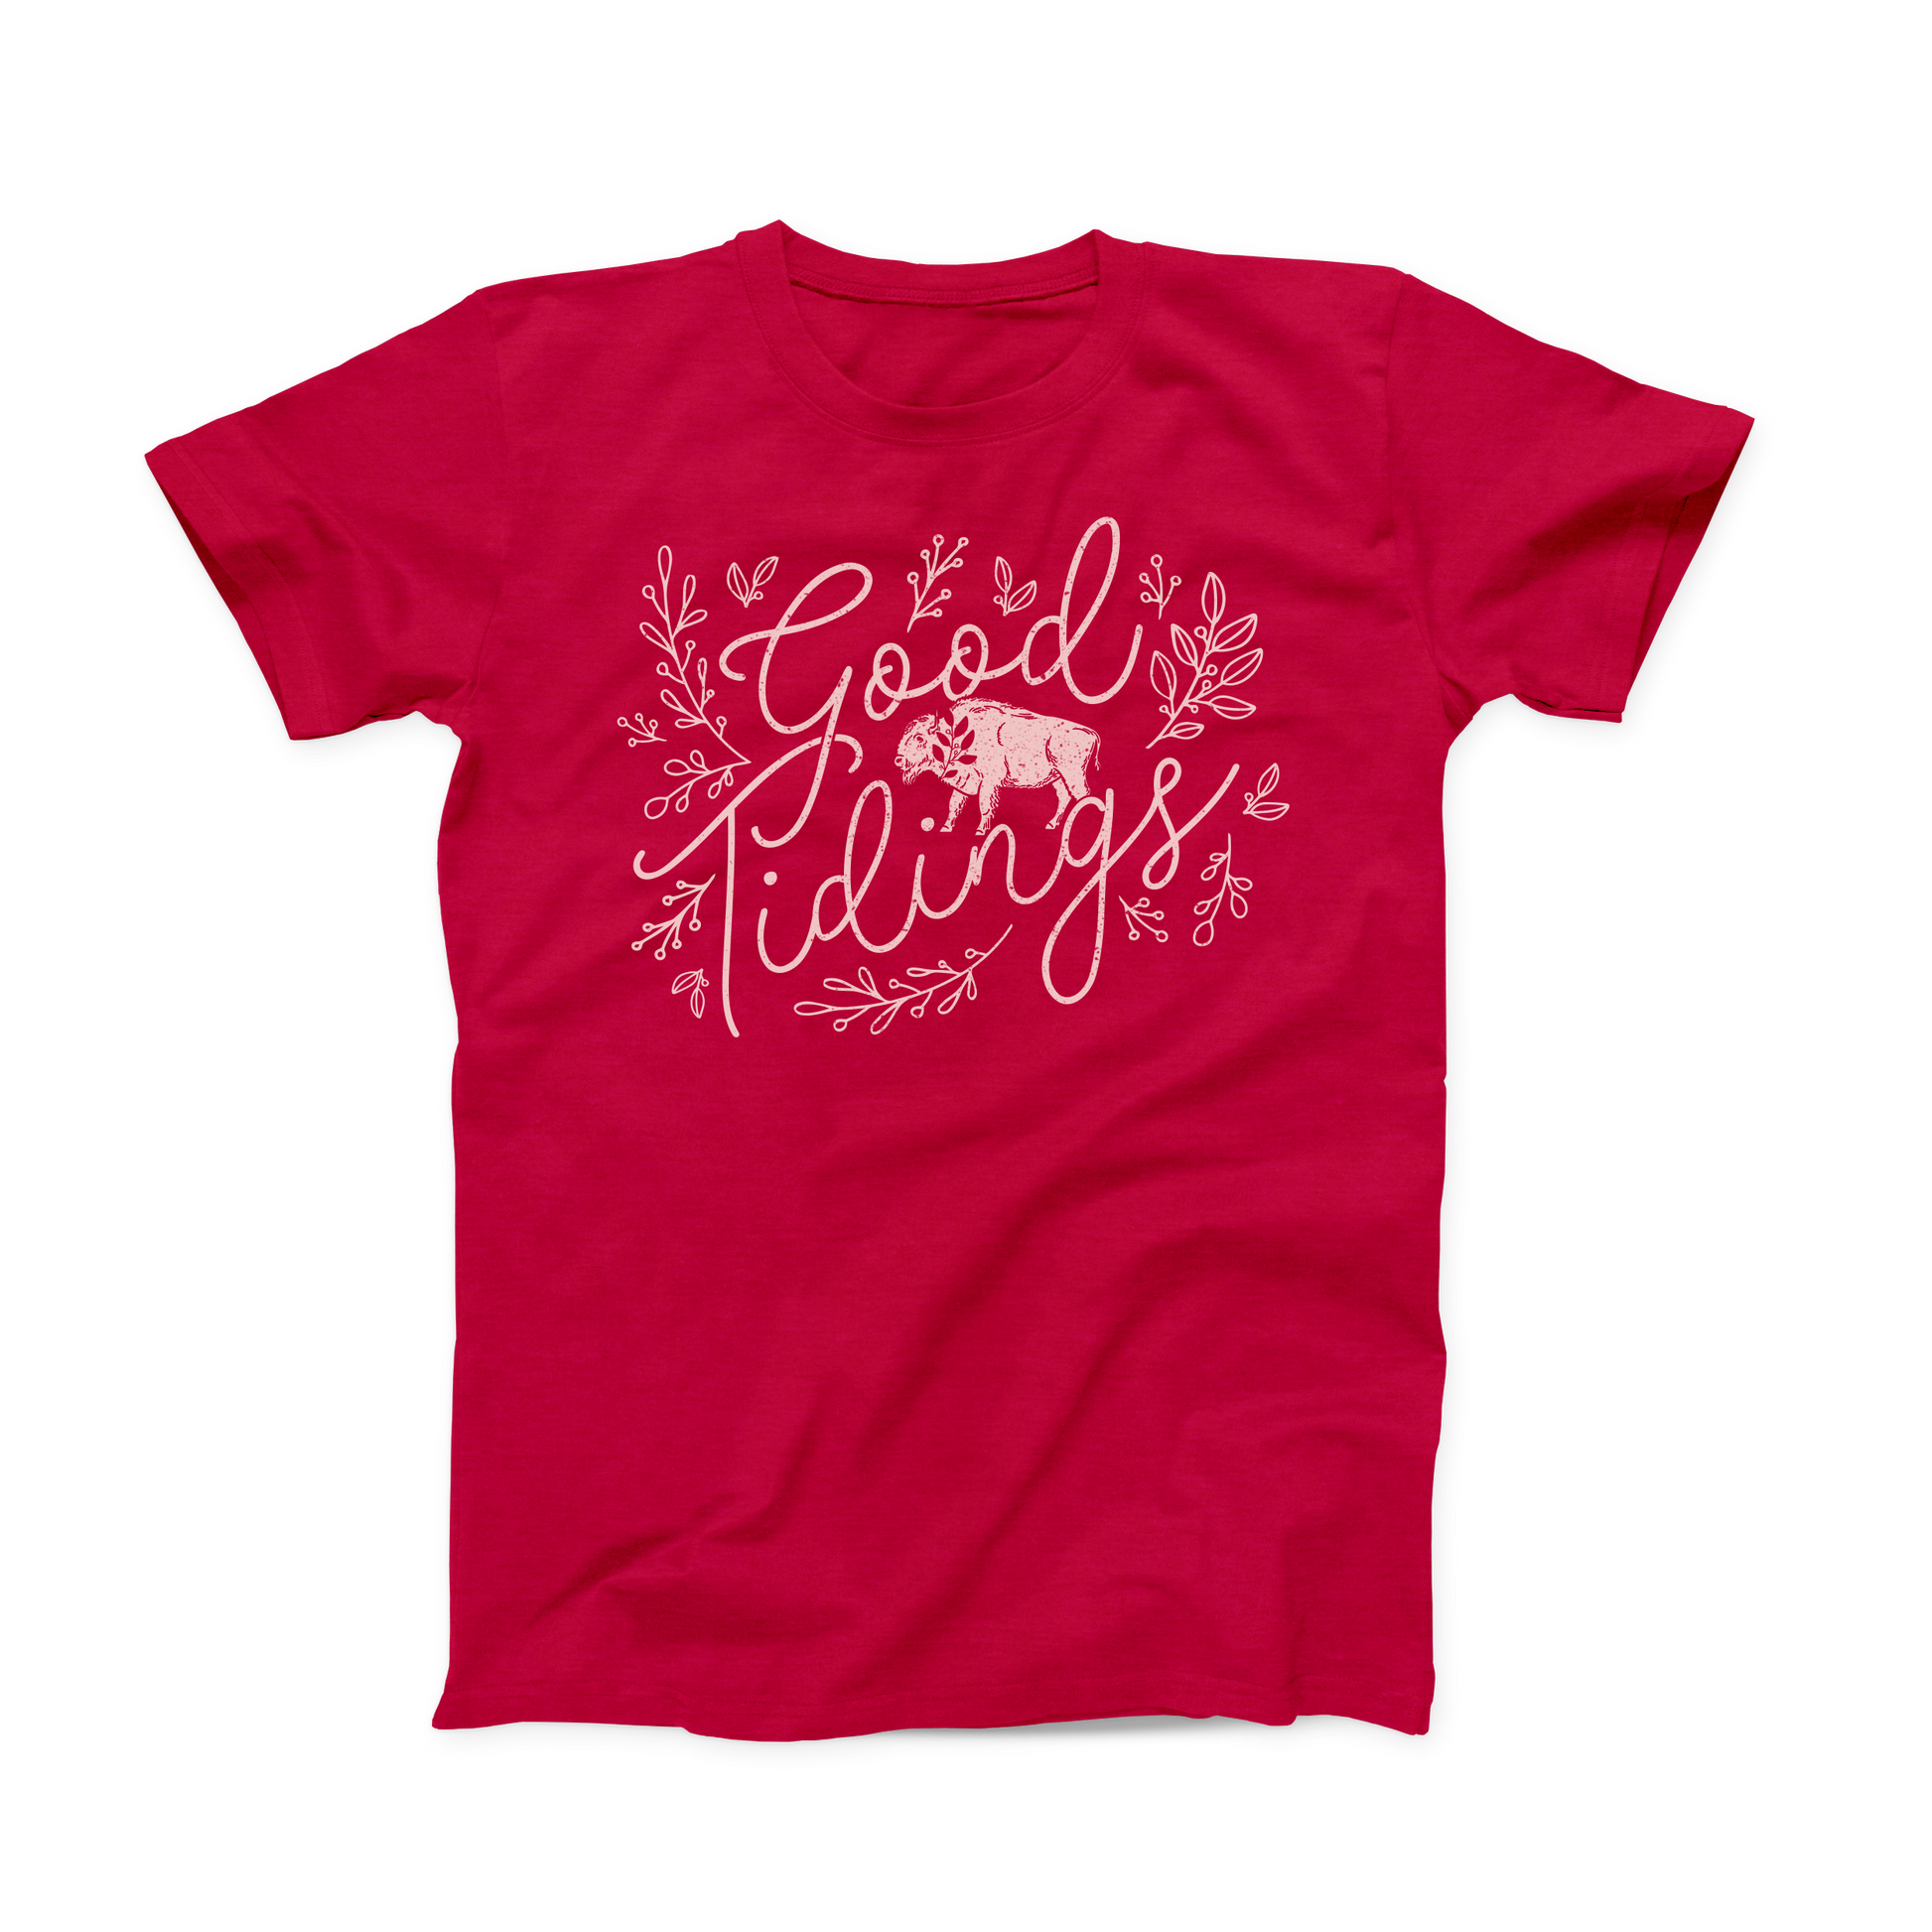 Heather Red colored Oklahoma T-shirt. Design is done in a soft white print and shows "Good Tidings" in a thin, script font. Between the words is a buffalo, and around the words are decorative leaf prints. 